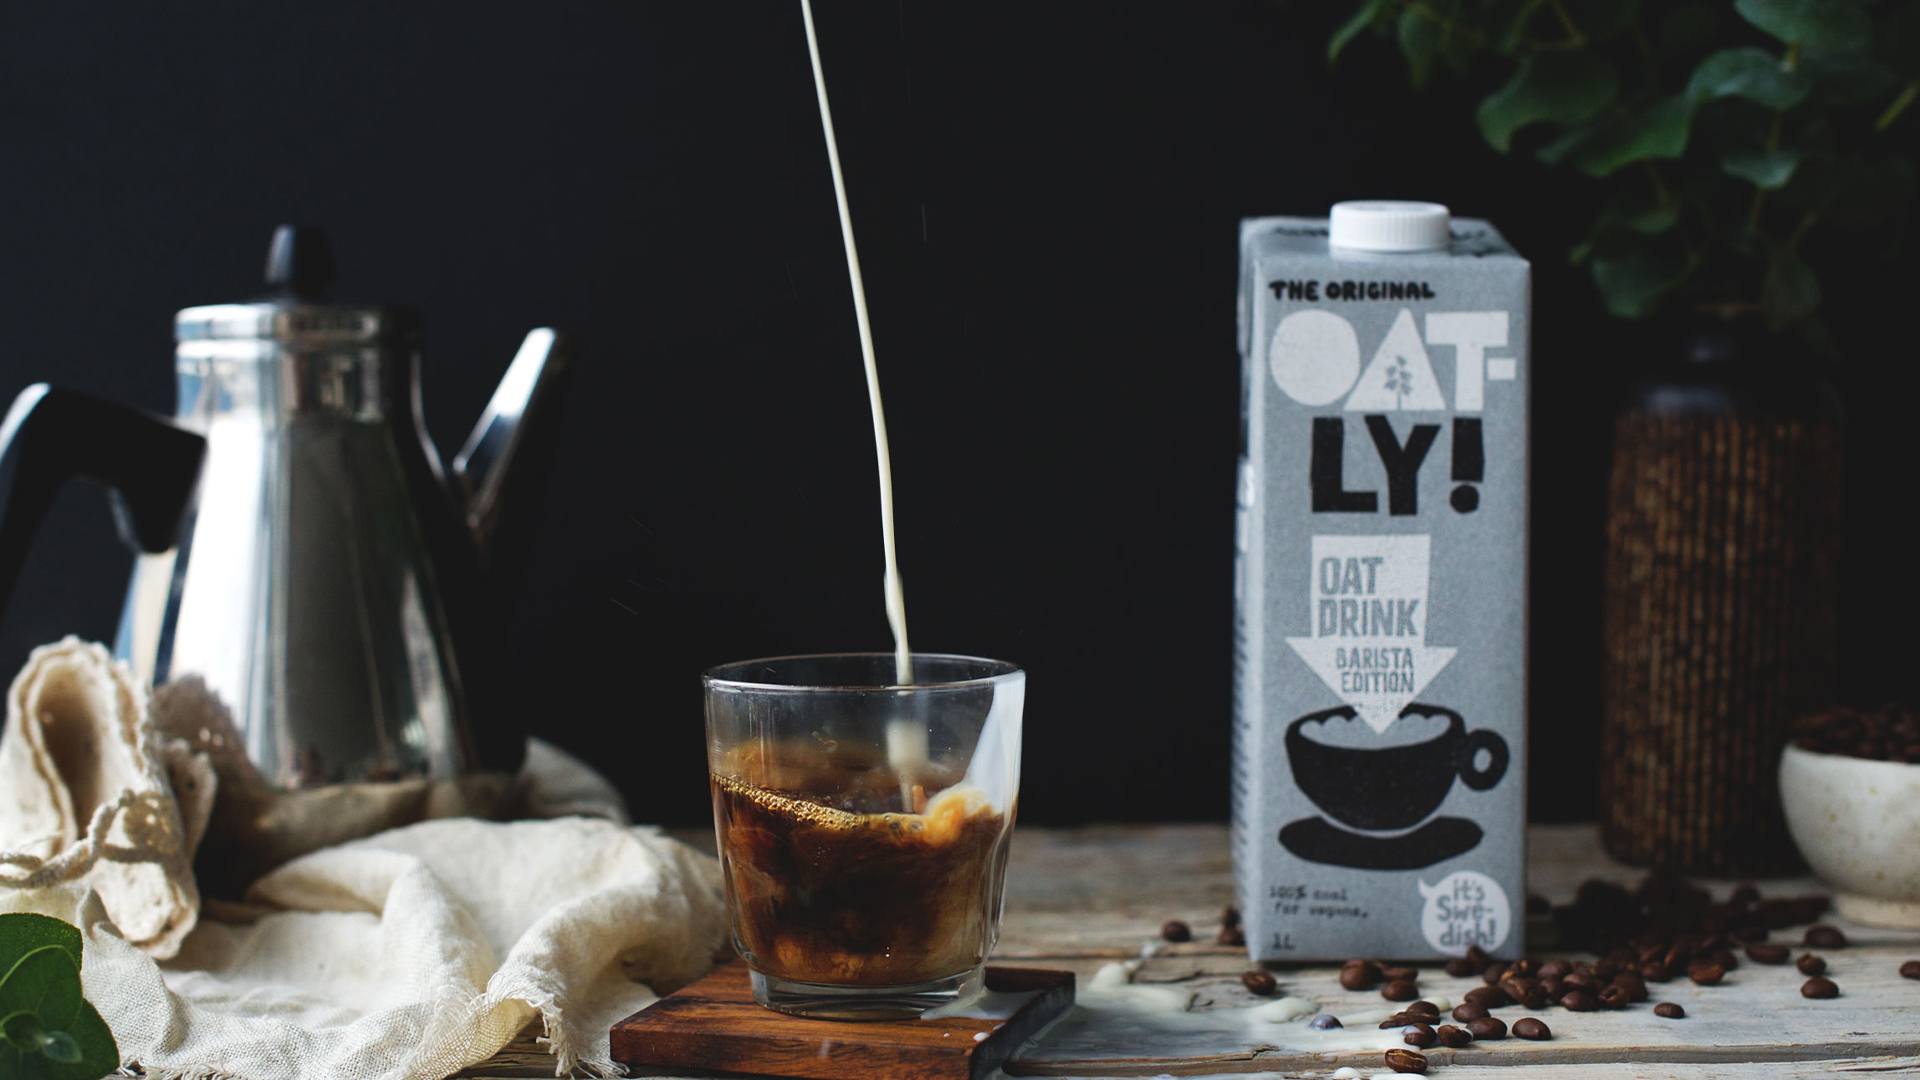 Oatly being poured into a coffee cup.